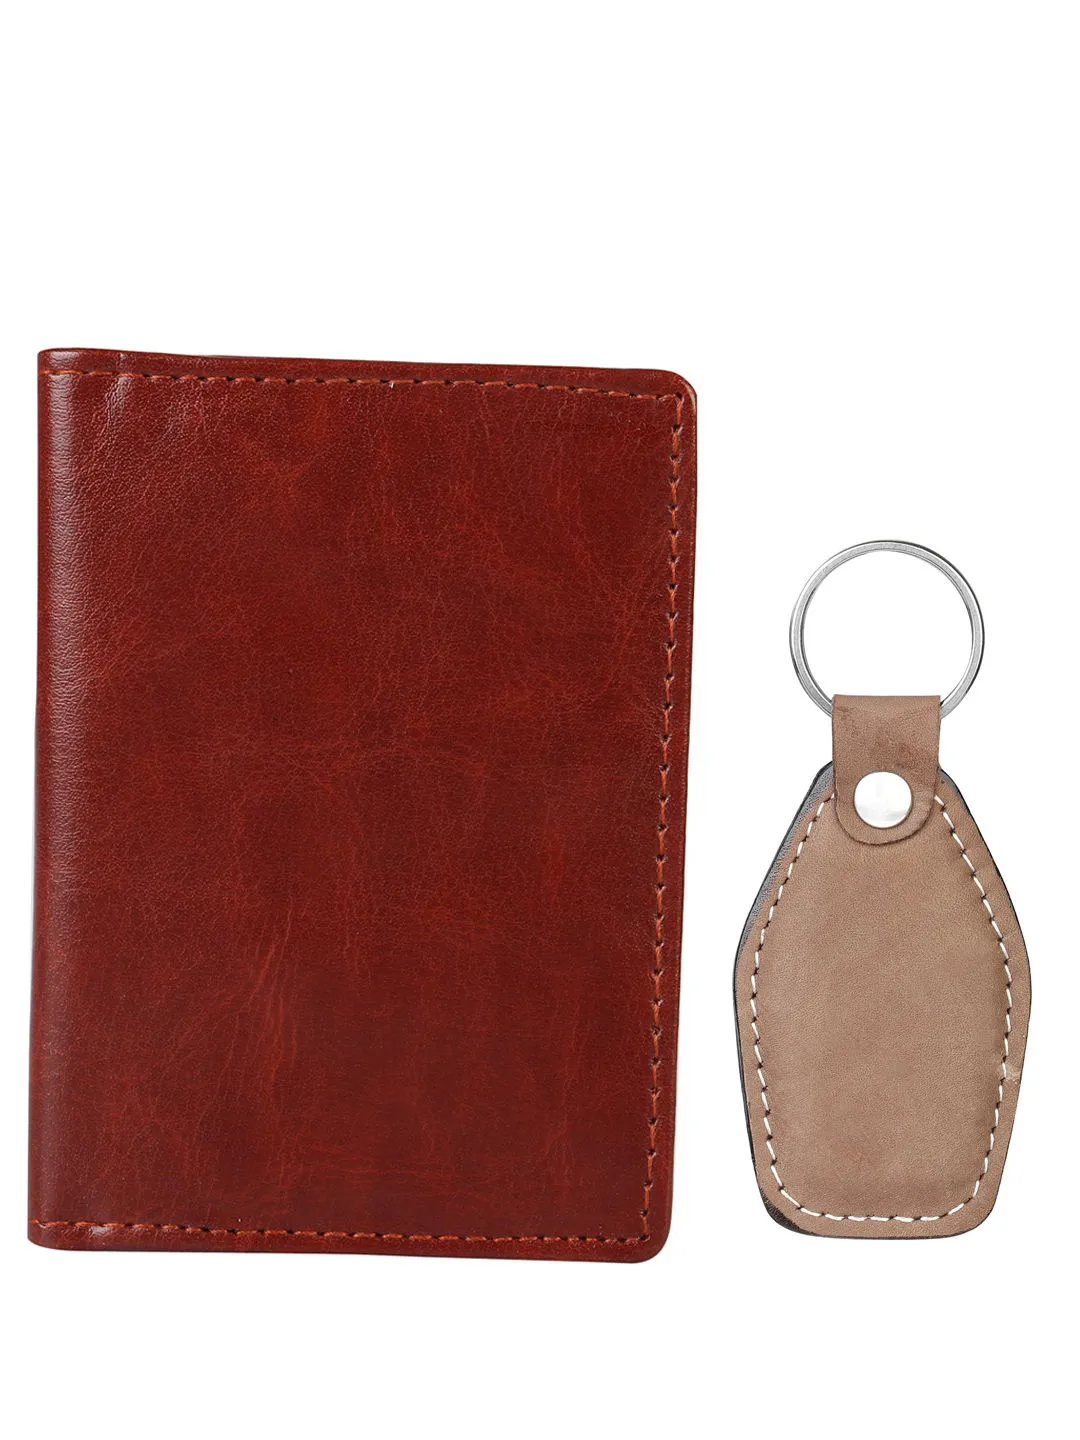 LONDON FASHION Card Holder And Key Chain Gift Set Brown/Beige